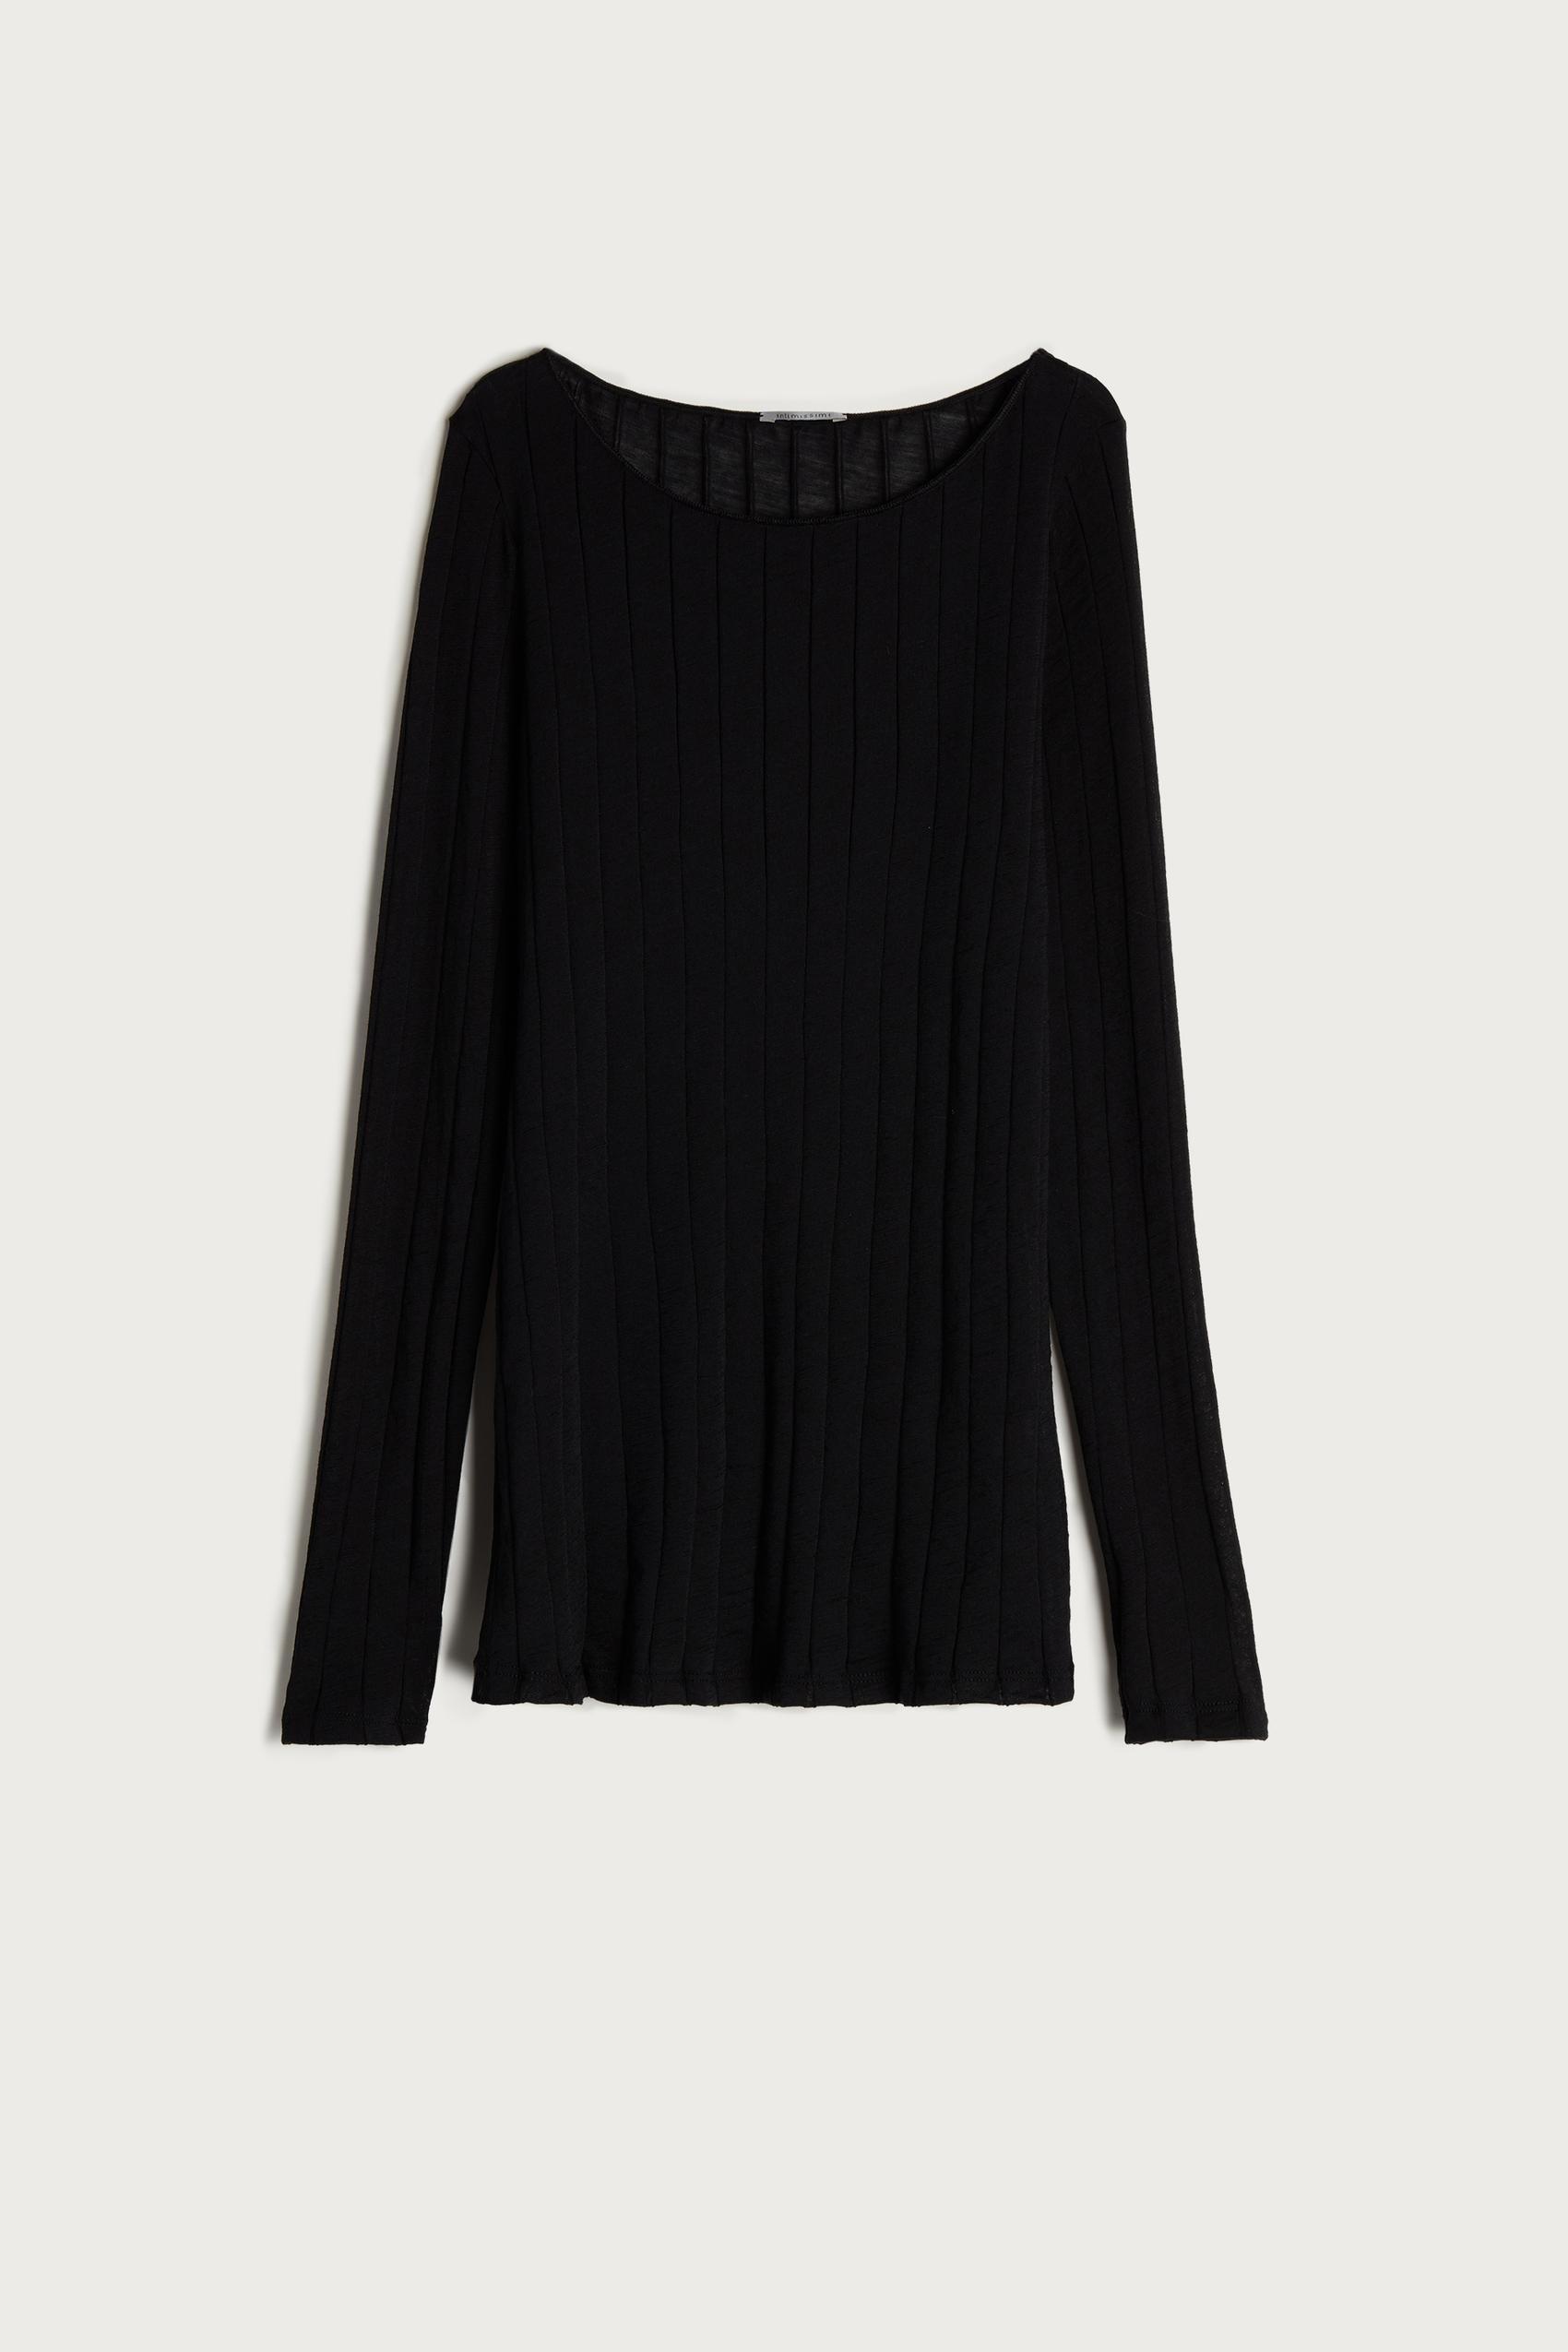 Intimissimi - Black Wool and Silk Ribbed Boat-neck Shirt